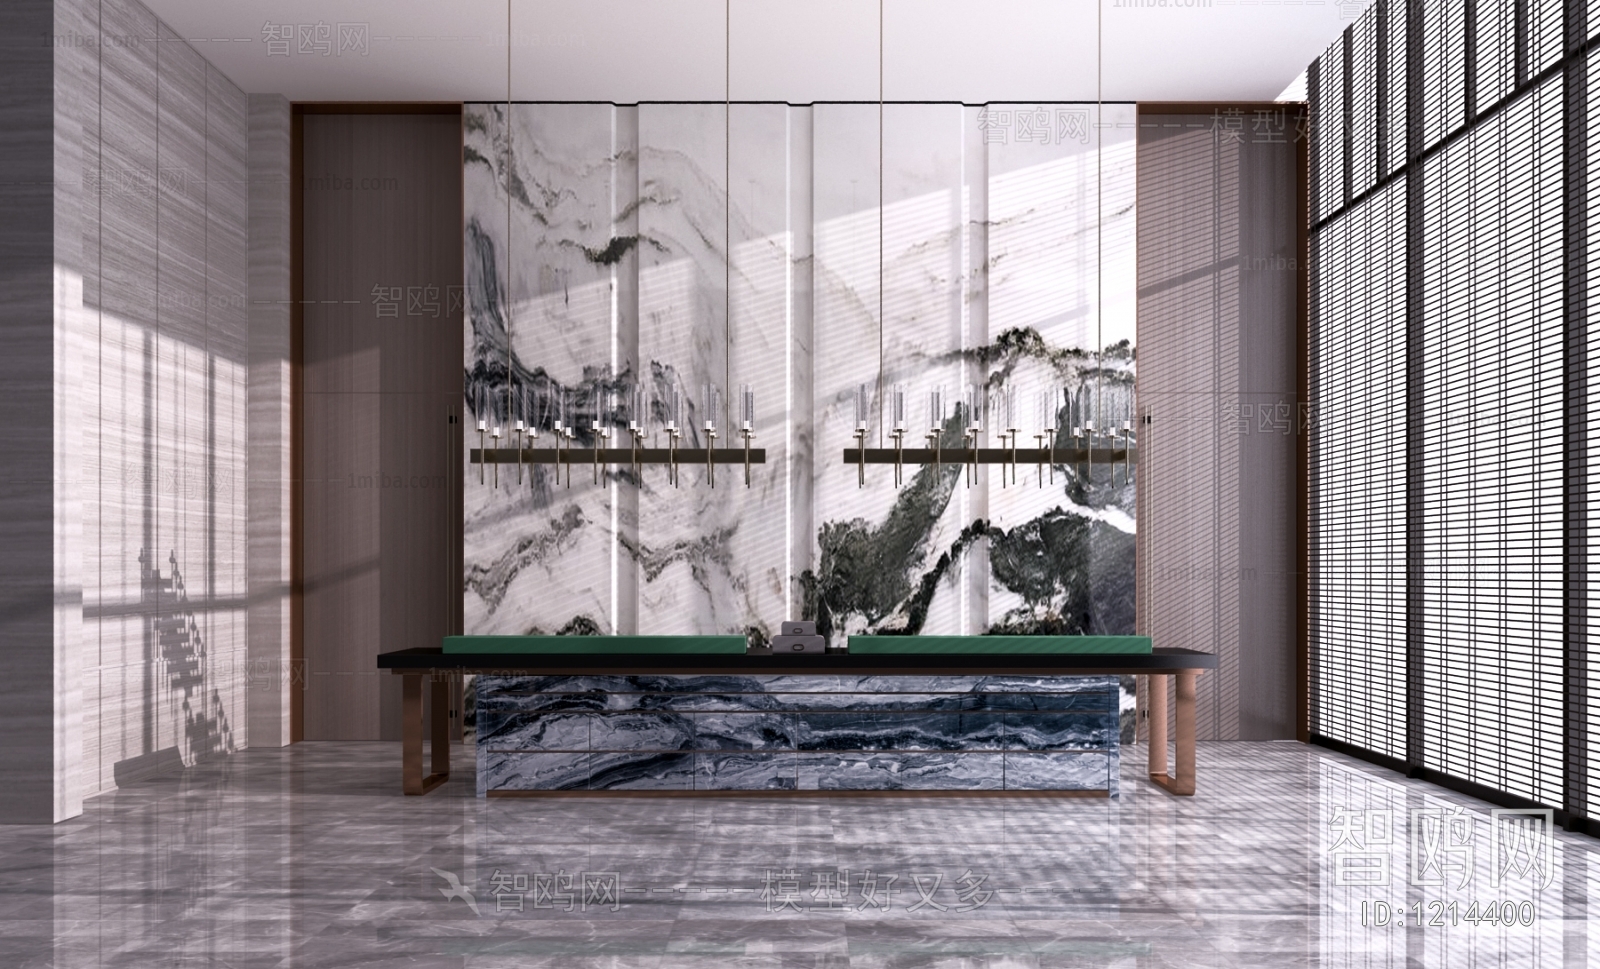 New Chinese Style Office Reception Desk